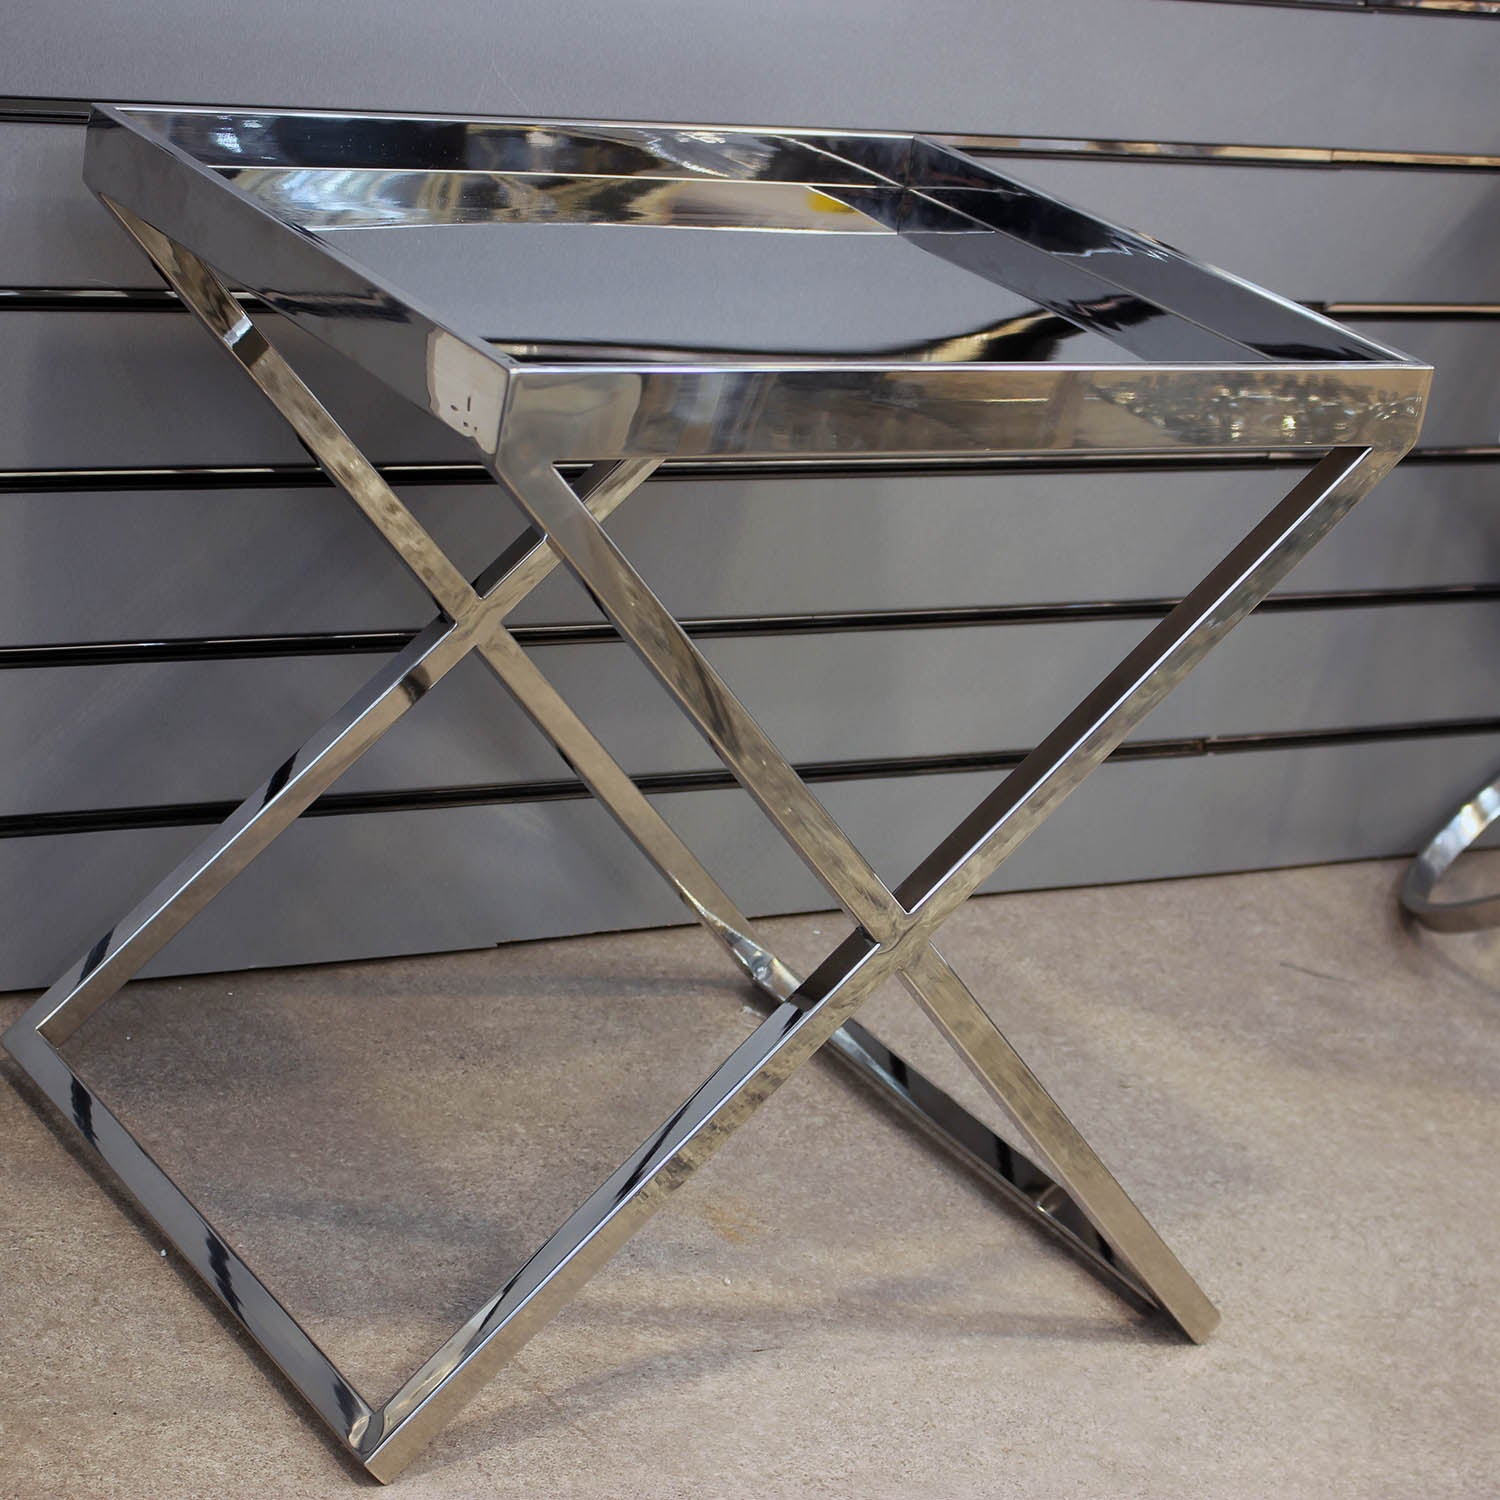 Stainless Steel Finish Table Sofa Tray - Bonnypack